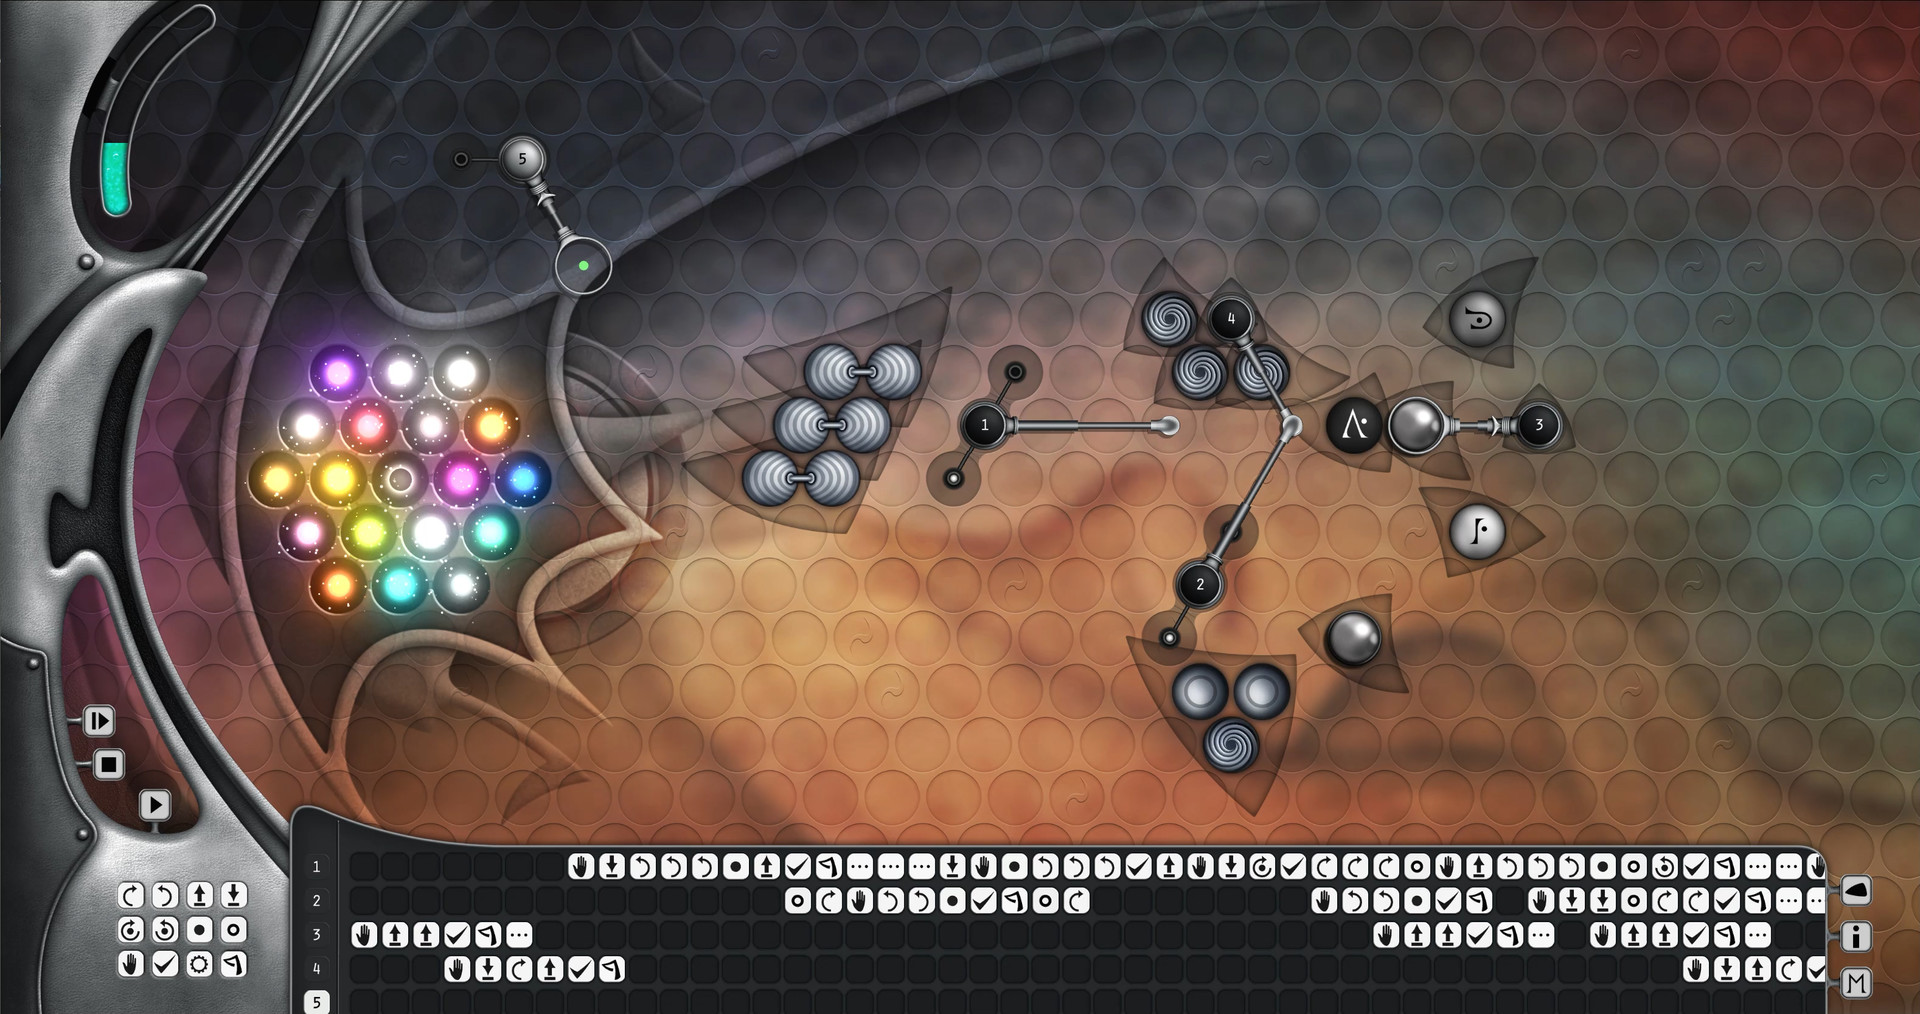 VELONE (Puzzle Solving Game Now Available for PC via Steam and